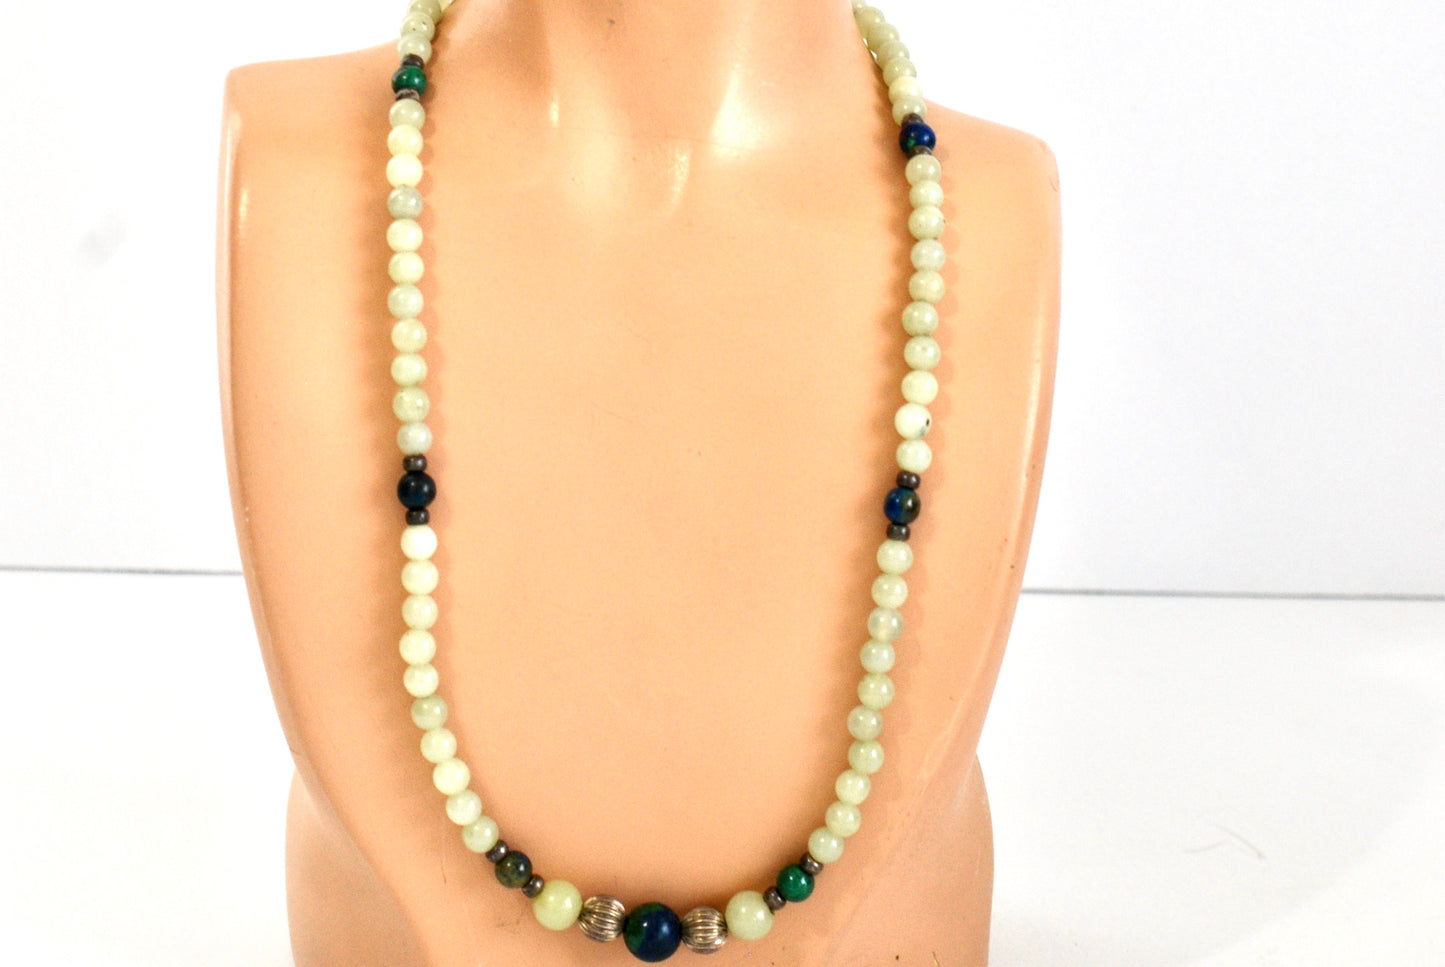 Jadeite Bead Necklace with Malachite, Azurite, and Silver